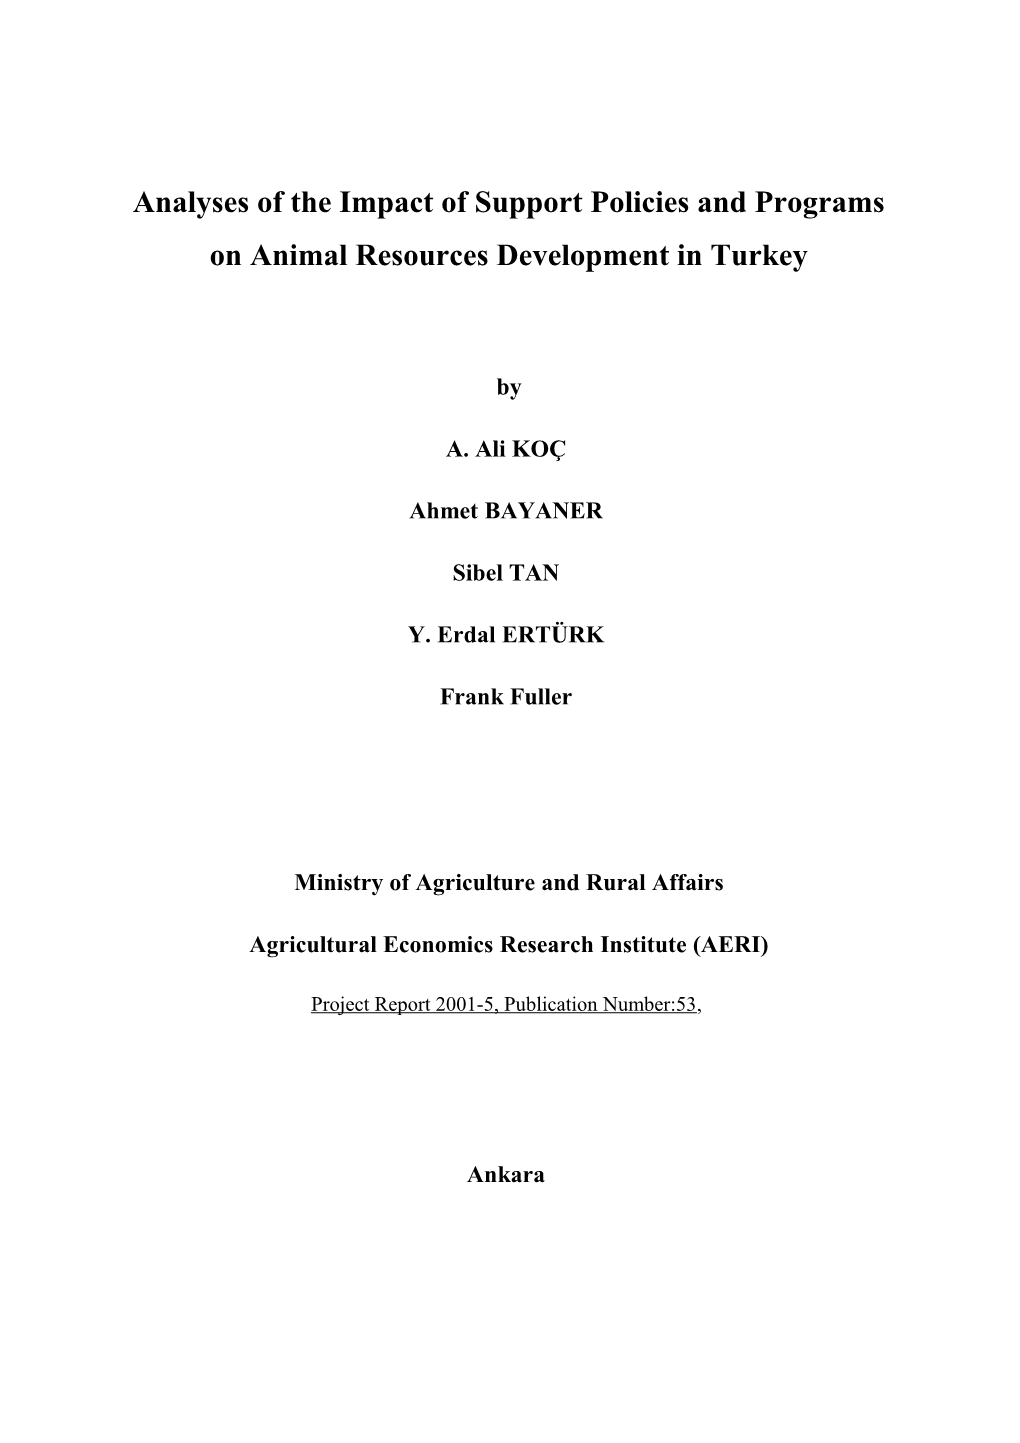 Analyses of the Impact of Support Policies and Programs on Animal Resources Development